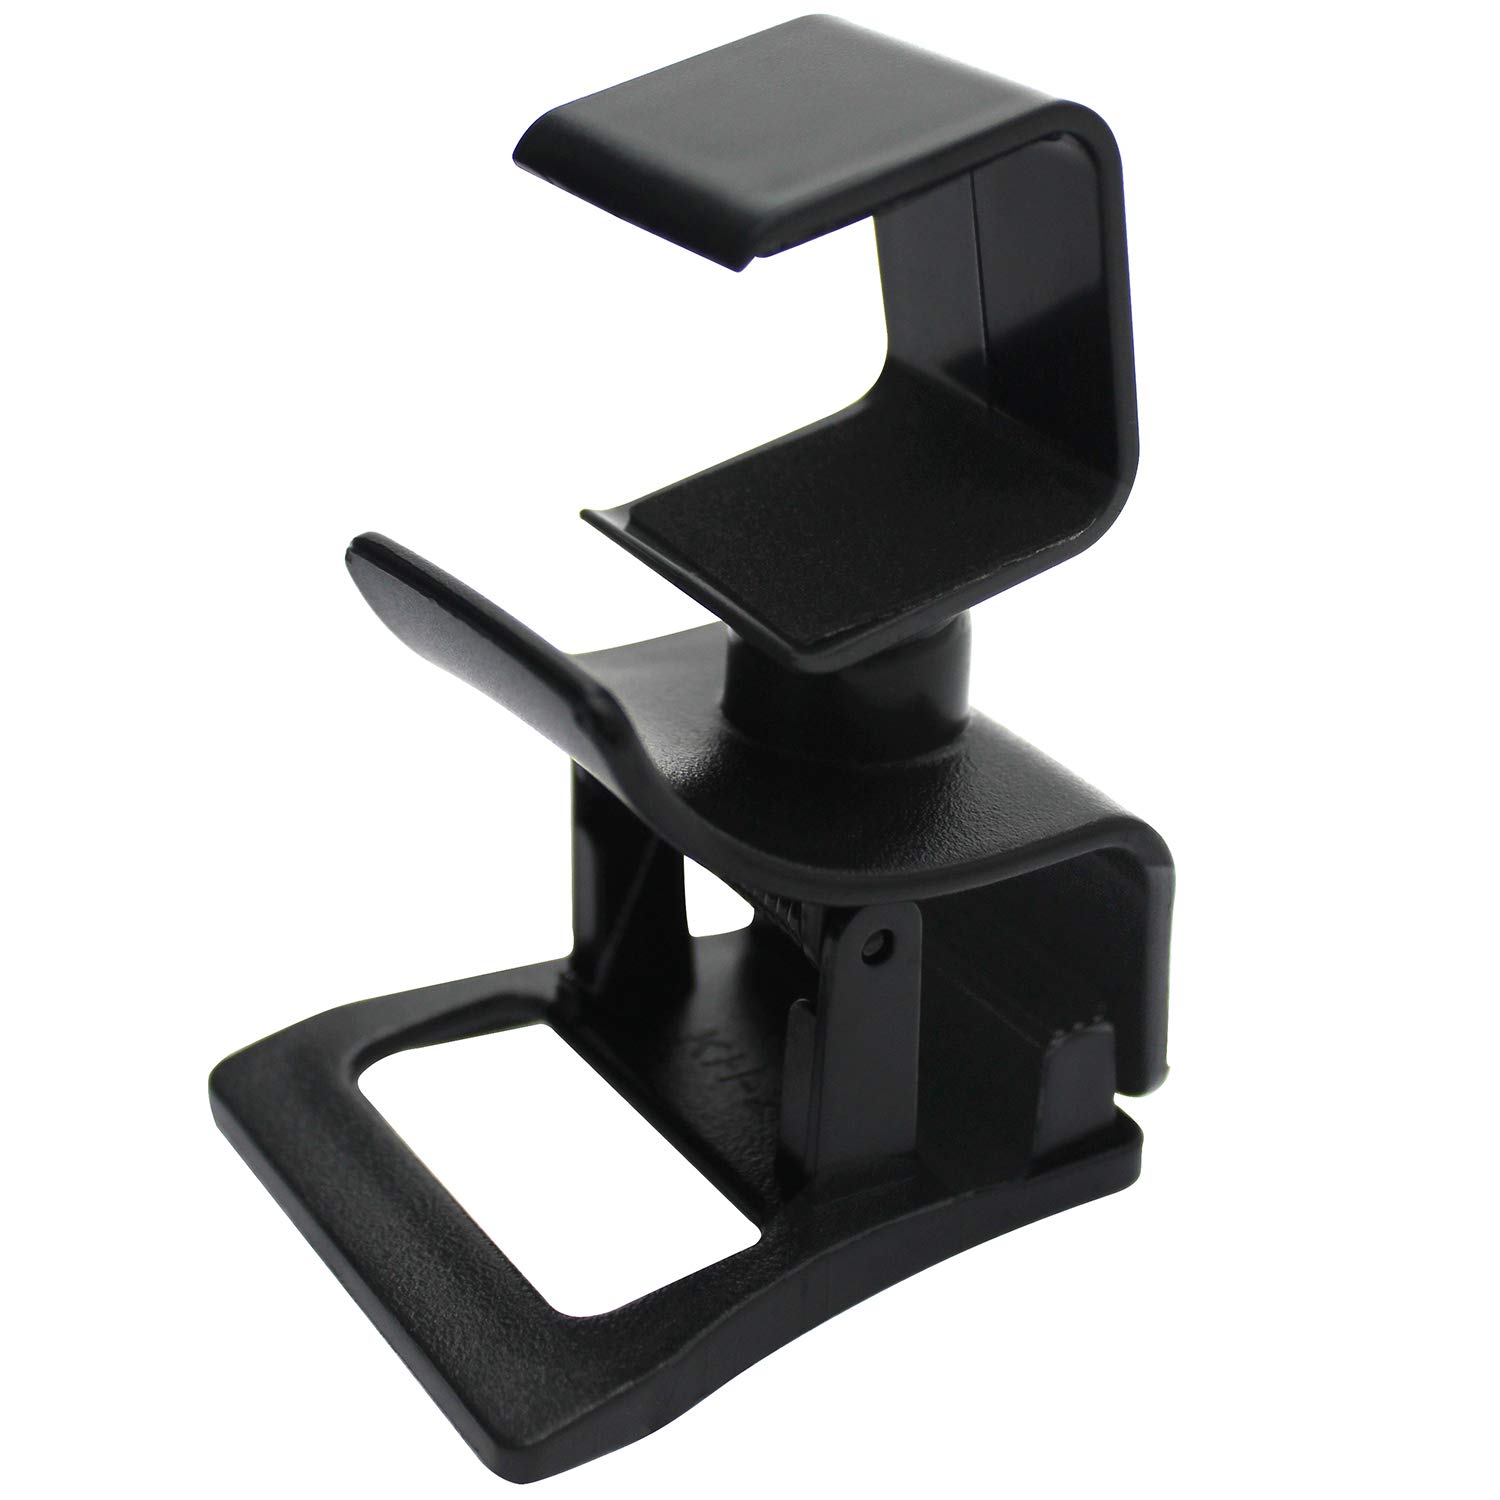 OSTENT TV Clip Mount Stand Holder for Sony PS4 Eye Camera Sensor [video game]